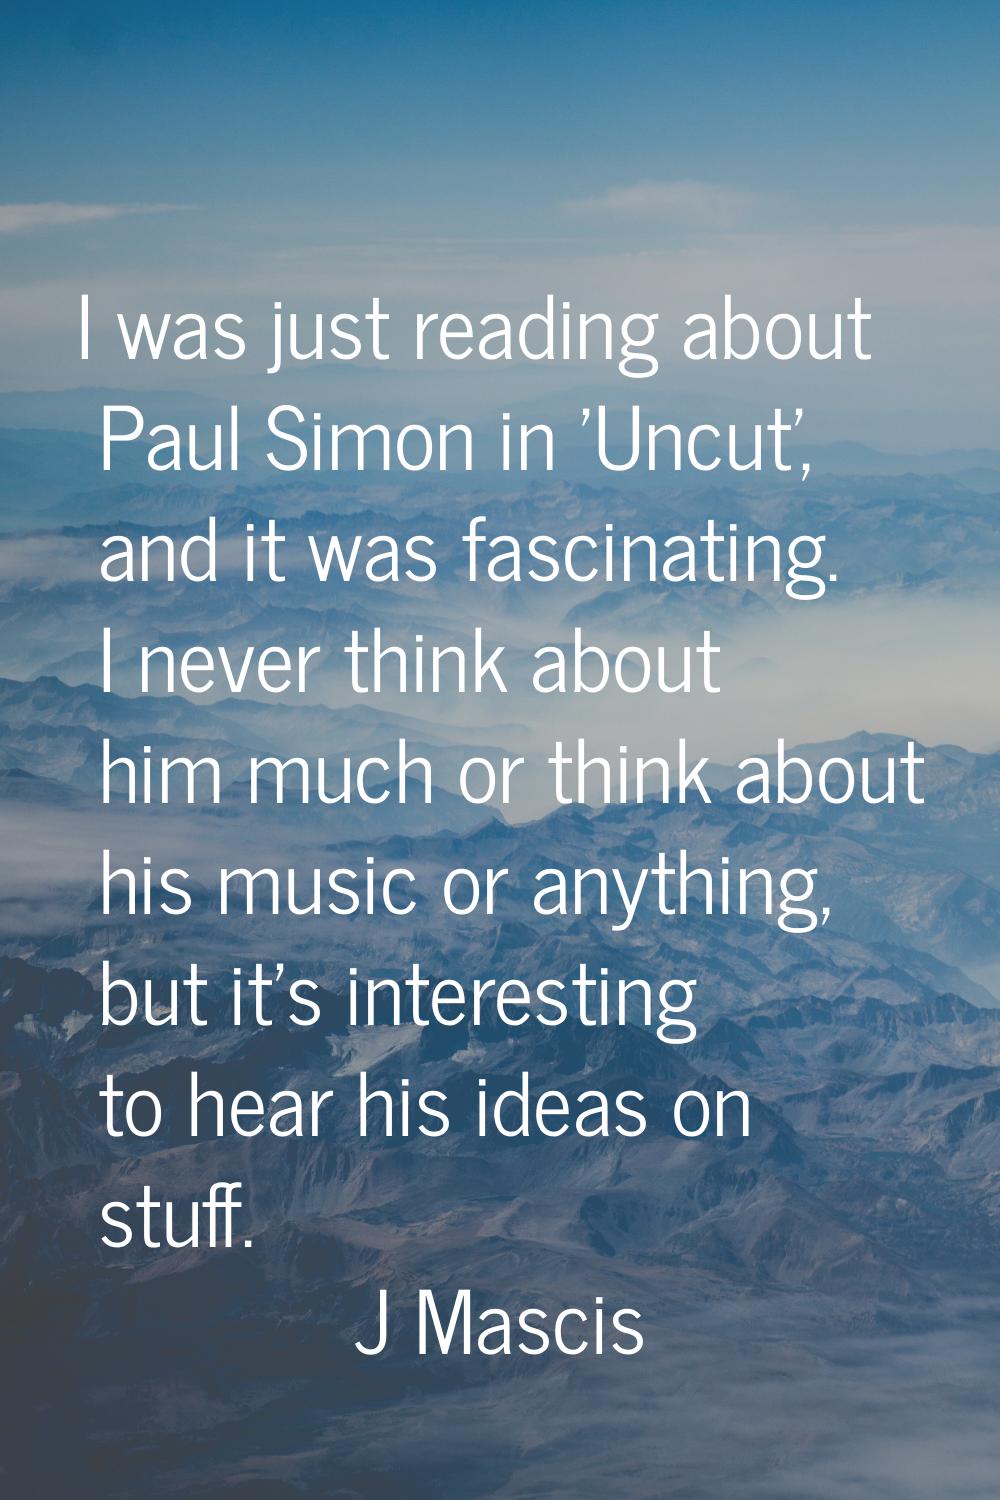 I was just reading about Paul Simon in 'Uncut', and it was fascinating. I never think about him muc